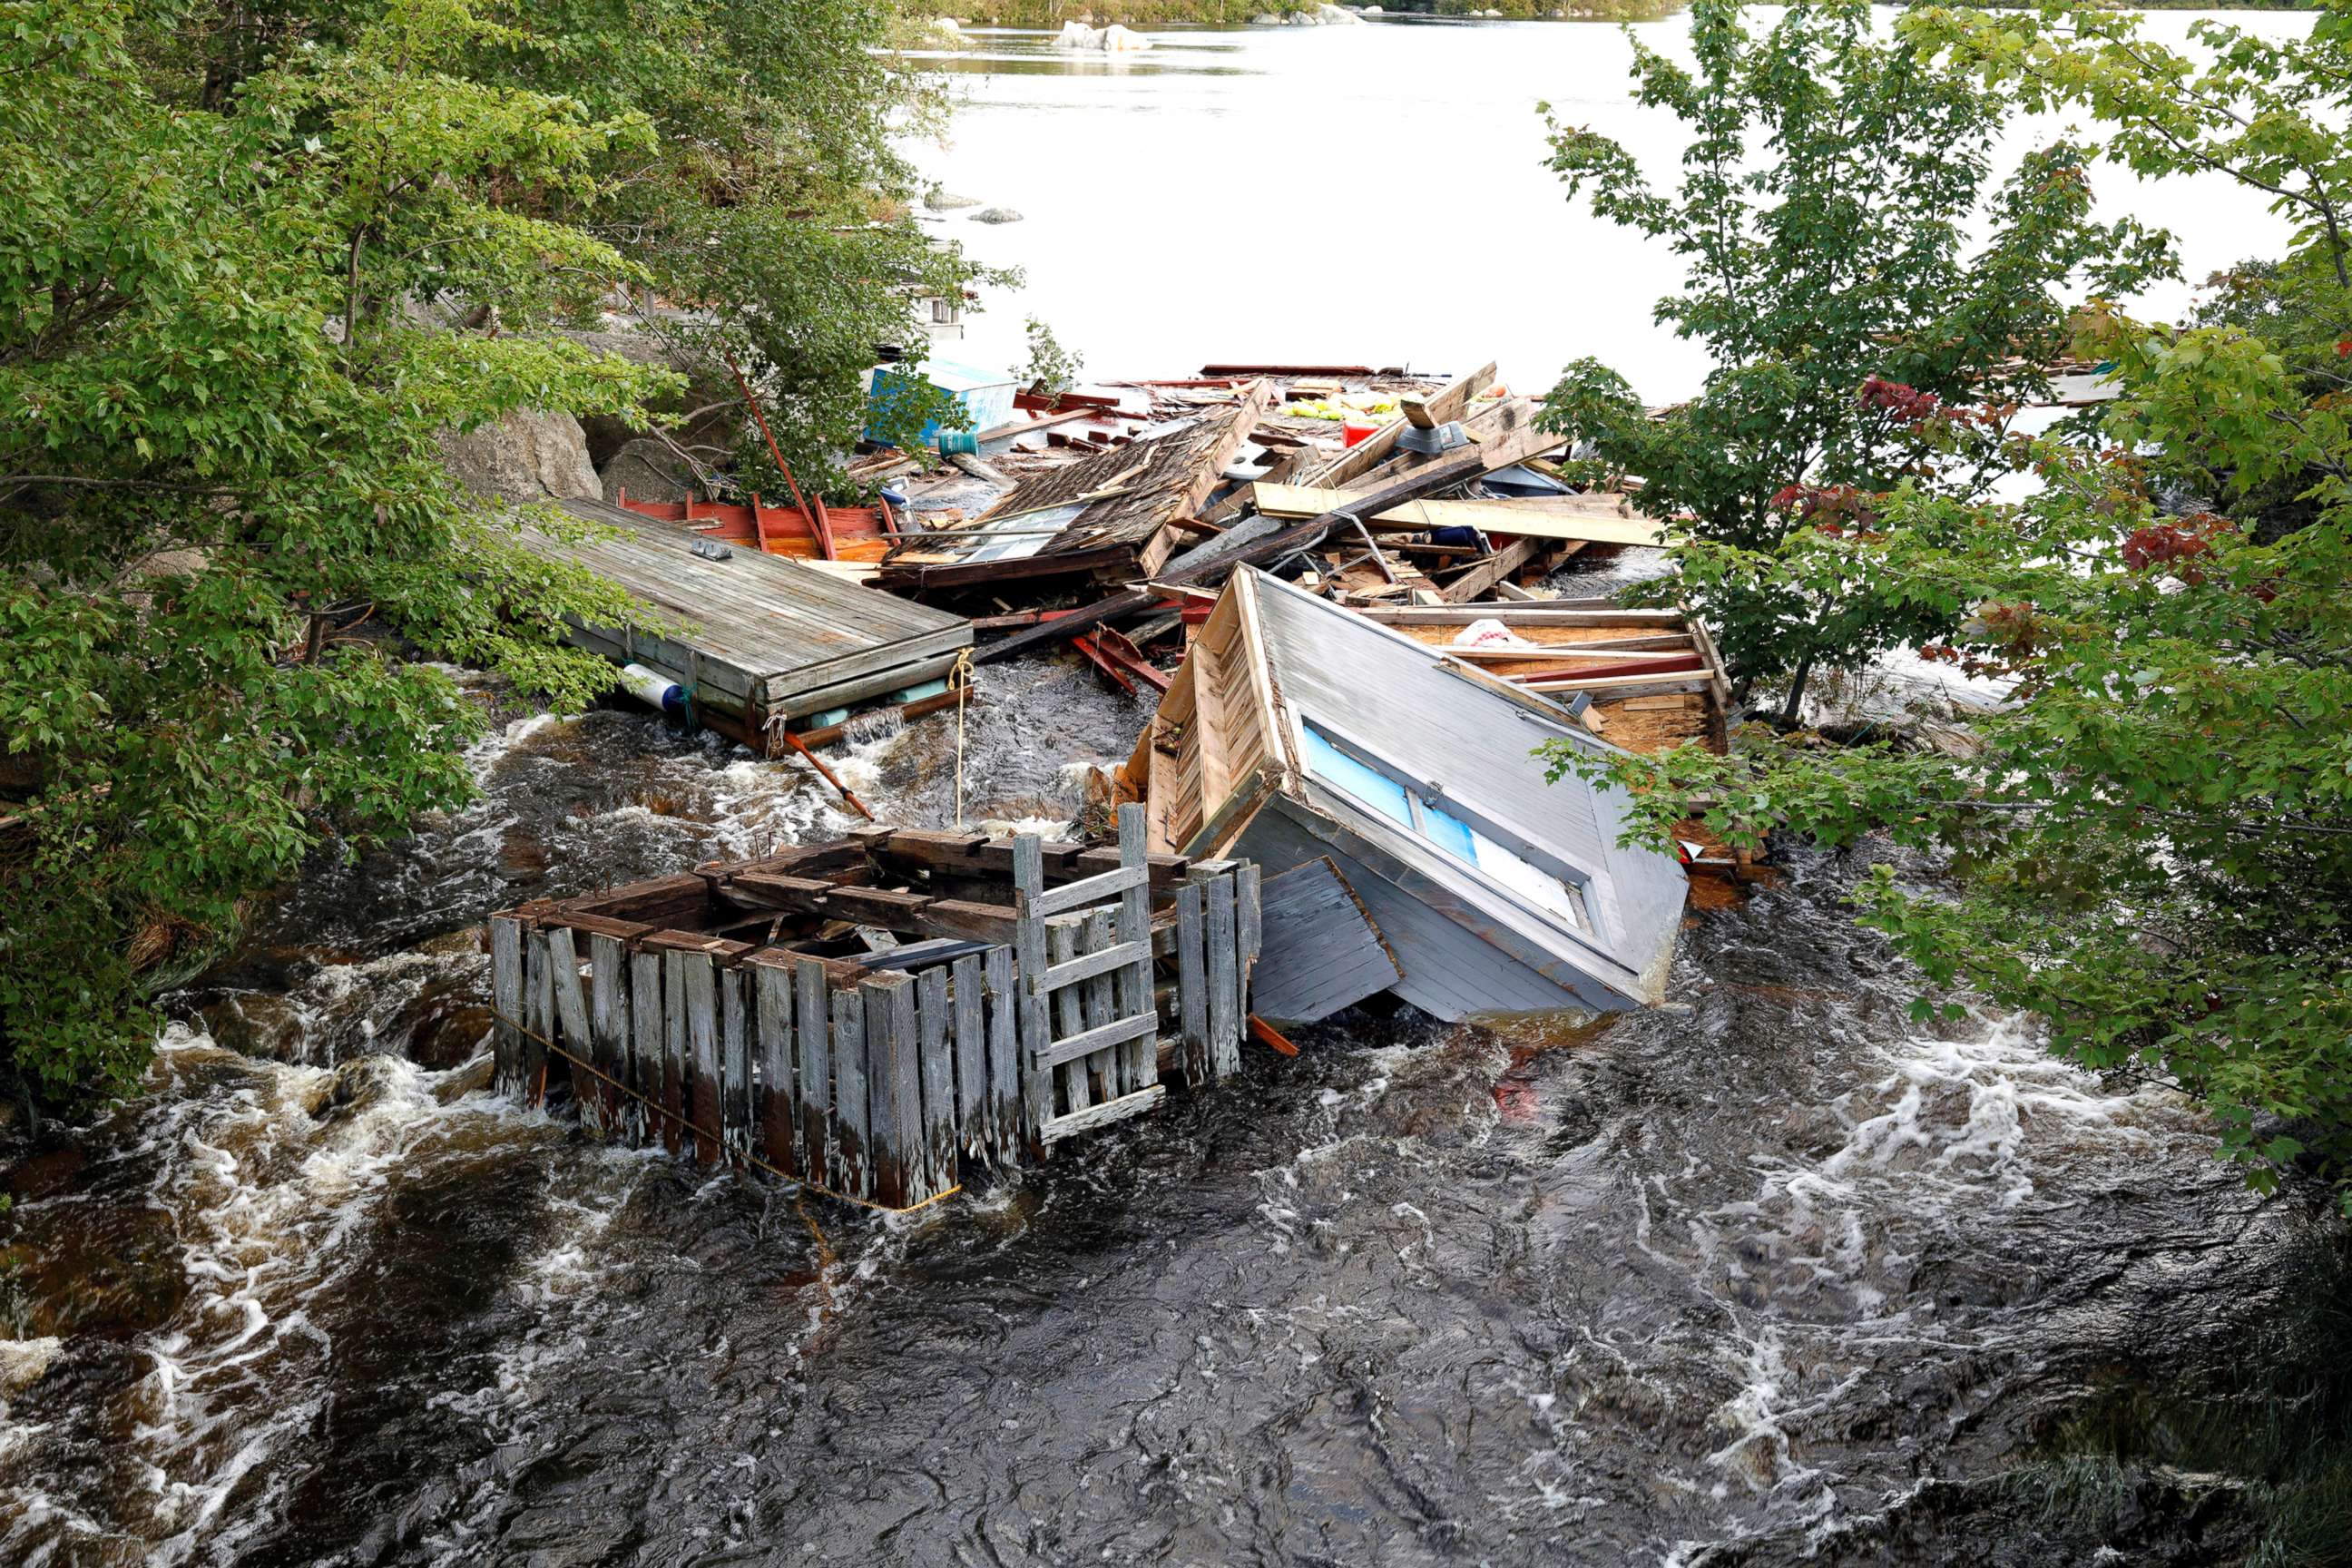 PHOTO: A fishing shed is caught in a river after the departure of Hurricane Dorian in Halifax, Nova Scotia, Canada, Sept. 8, 2019.